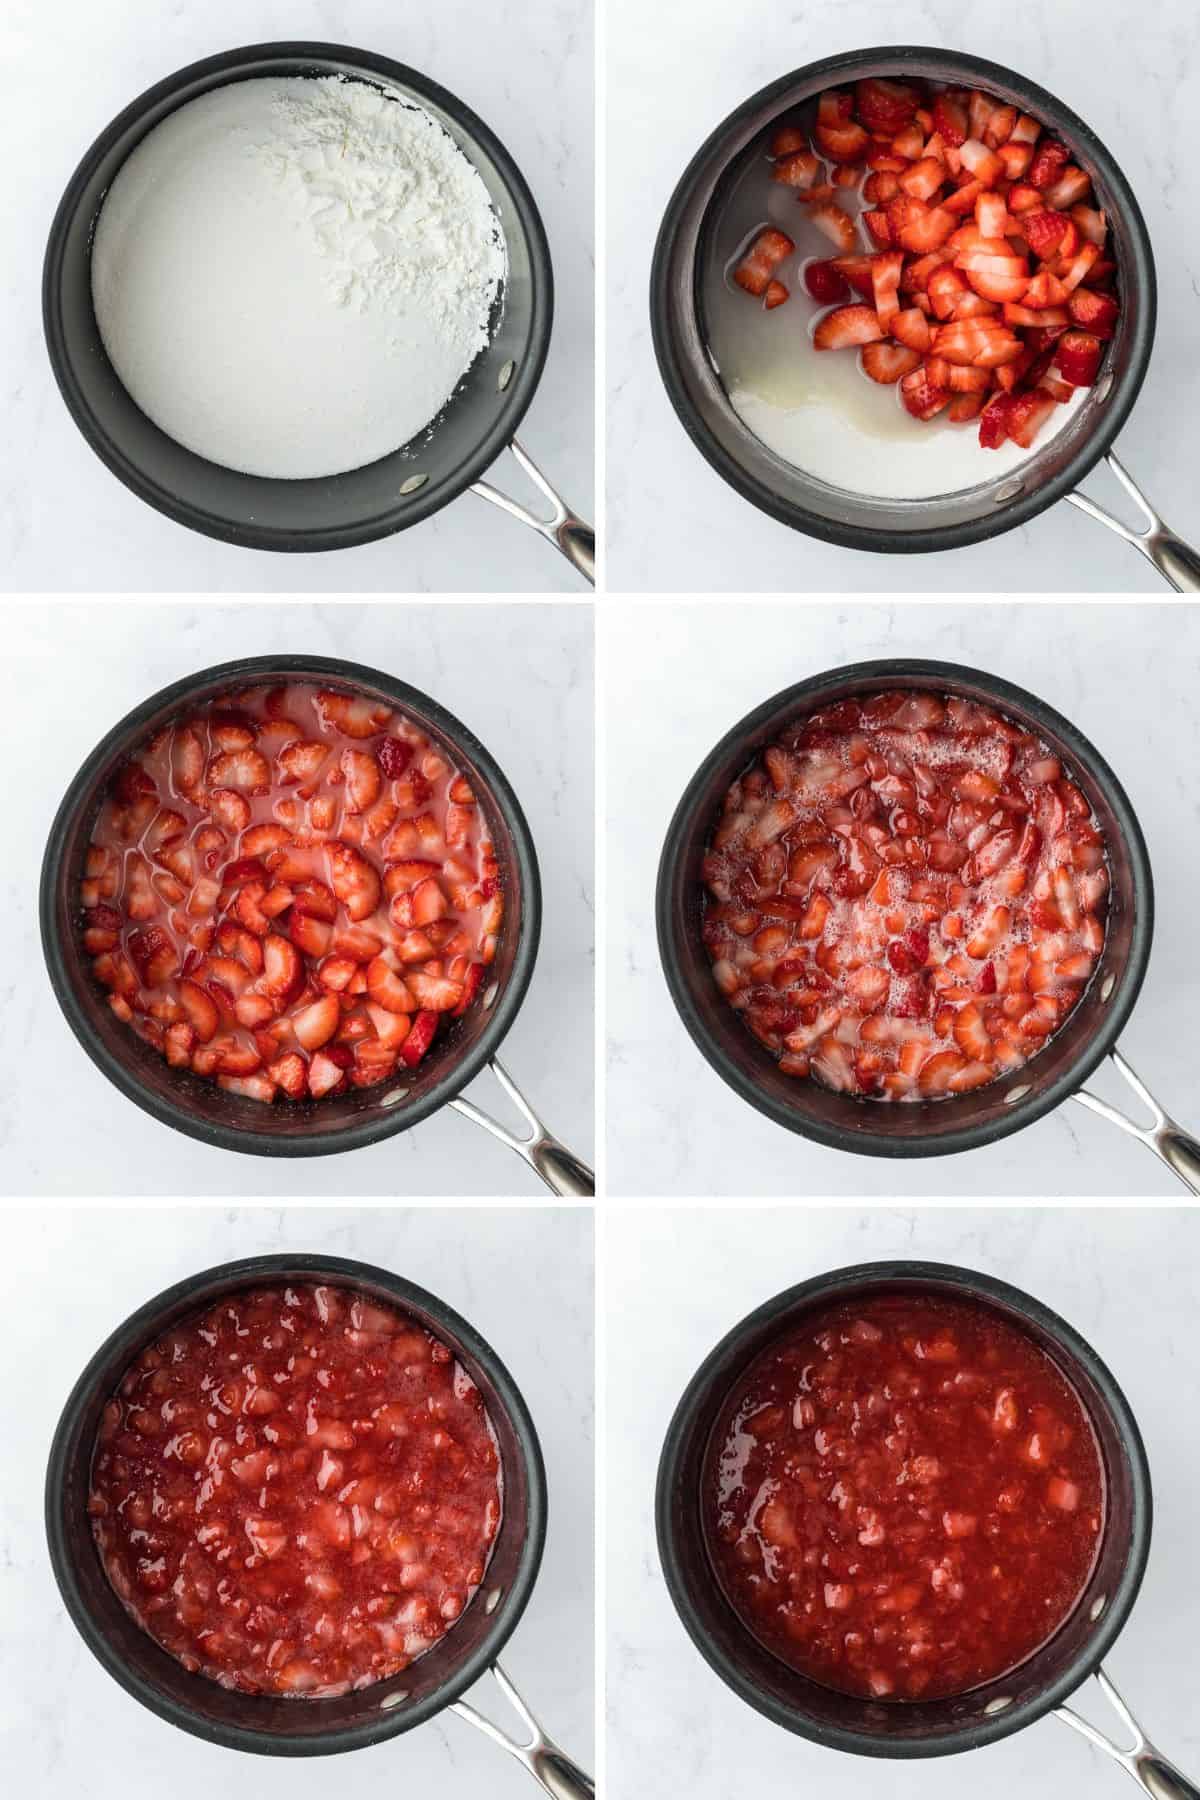 Collage of steps to make strawberry sauce with mixing the sugar, cornstarch and salt, adding the strawberries, heating the mixture, crushing the strawberries, and simmering the finished sauce